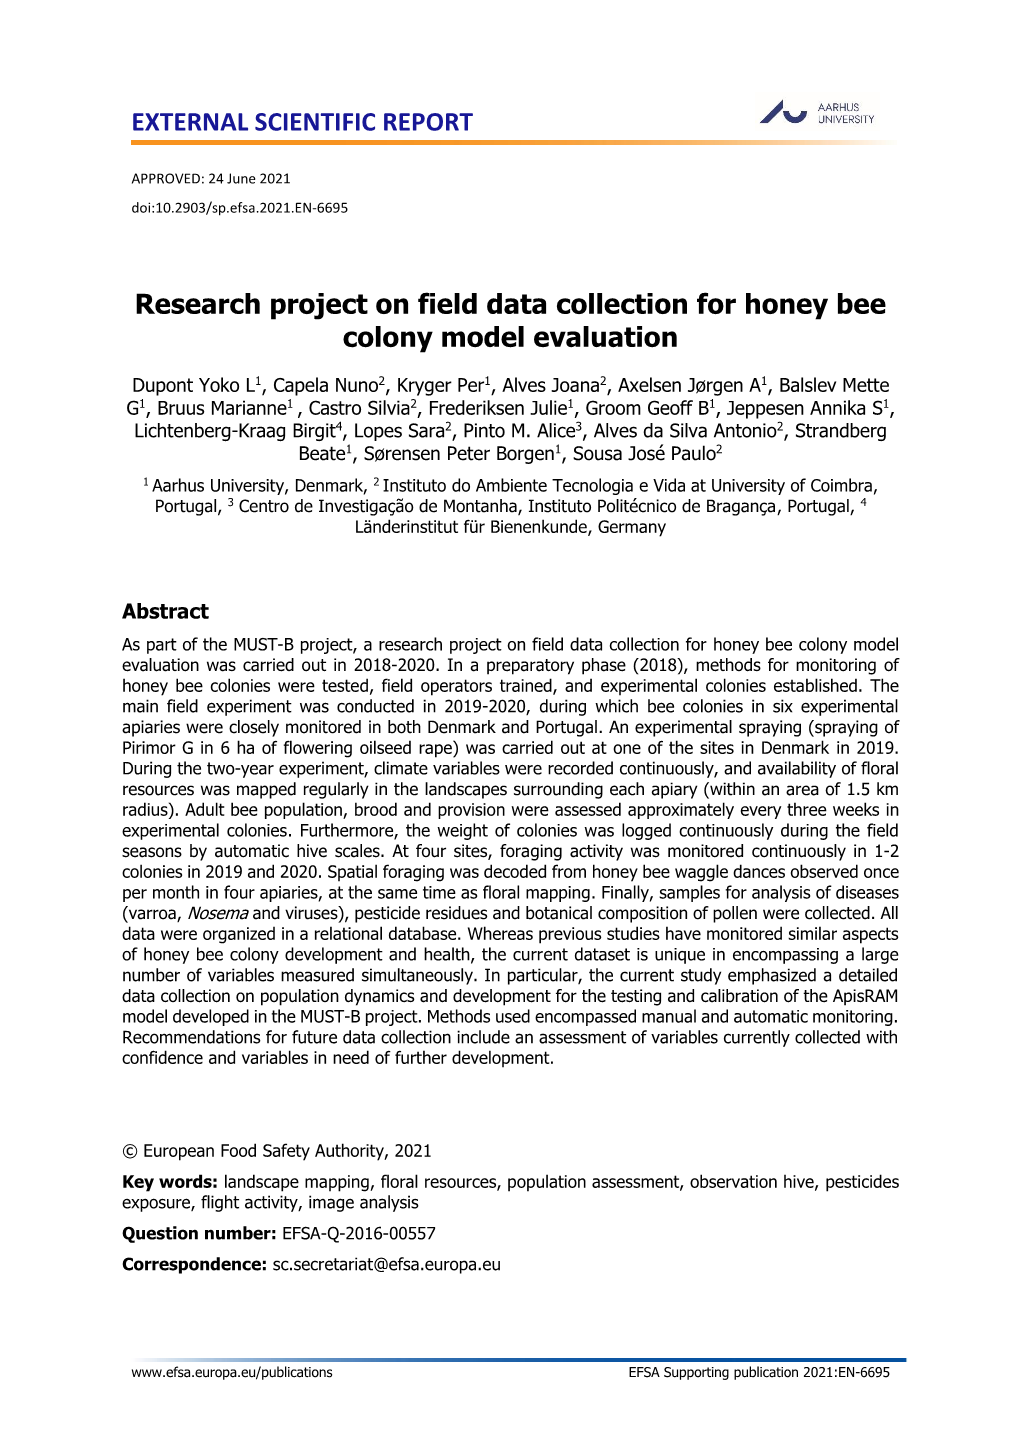 EXTERNAL SCIENTIFIC REPORT Research Project on Field Data